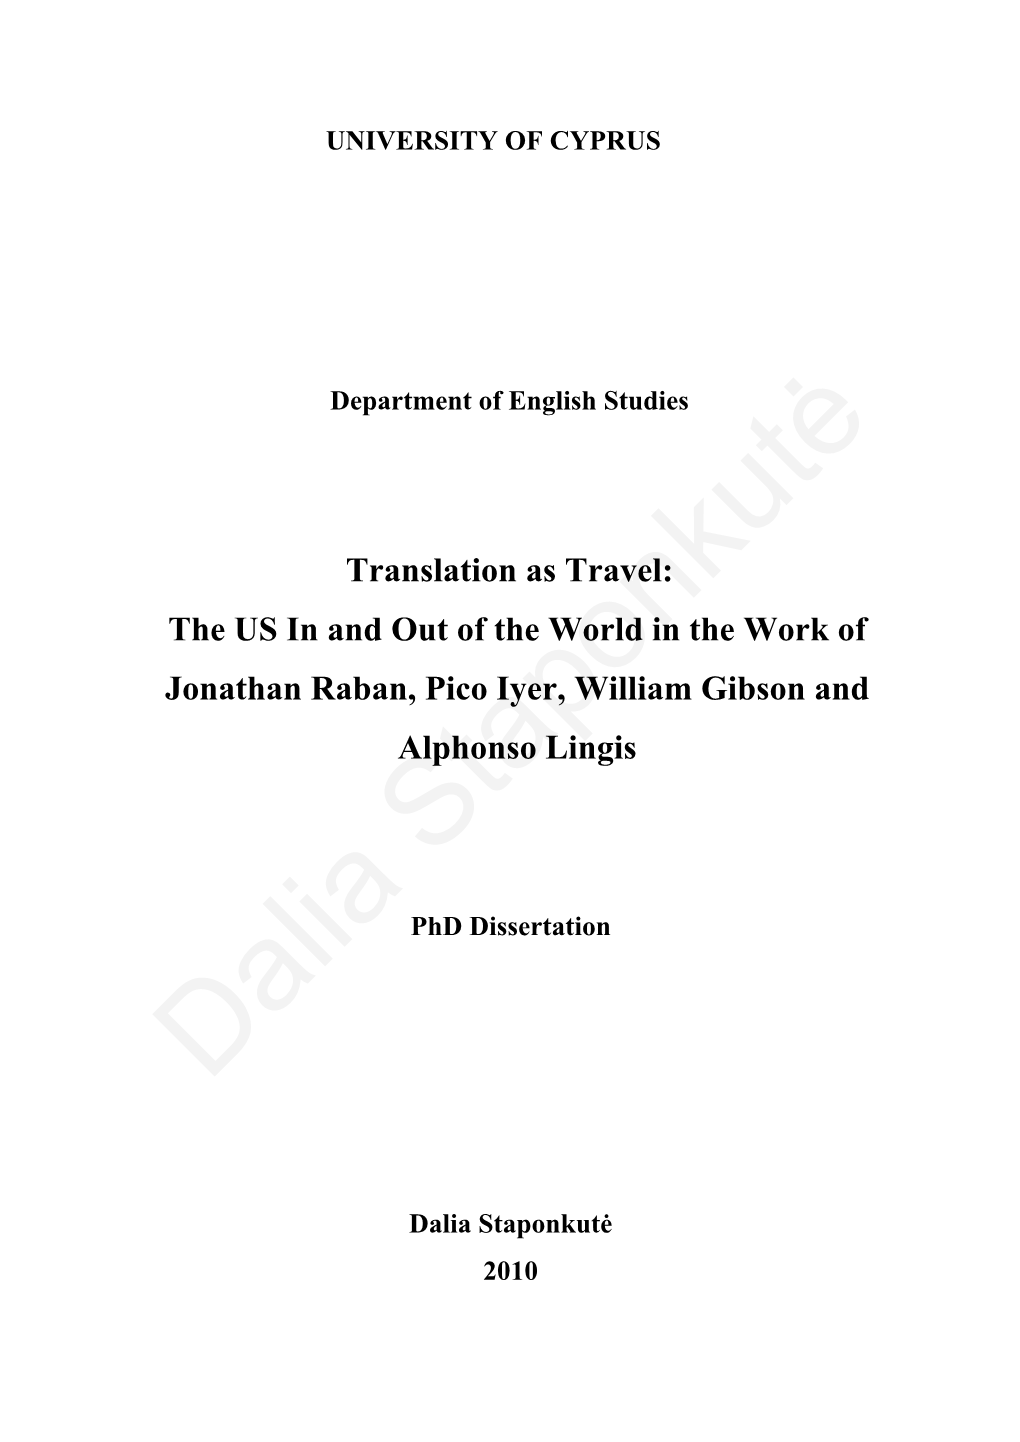 Translation As Travel: the US in and out of the World in the Work of Jonathan Raban, Pico Iyer, William Gibson and Alphonso Lingis